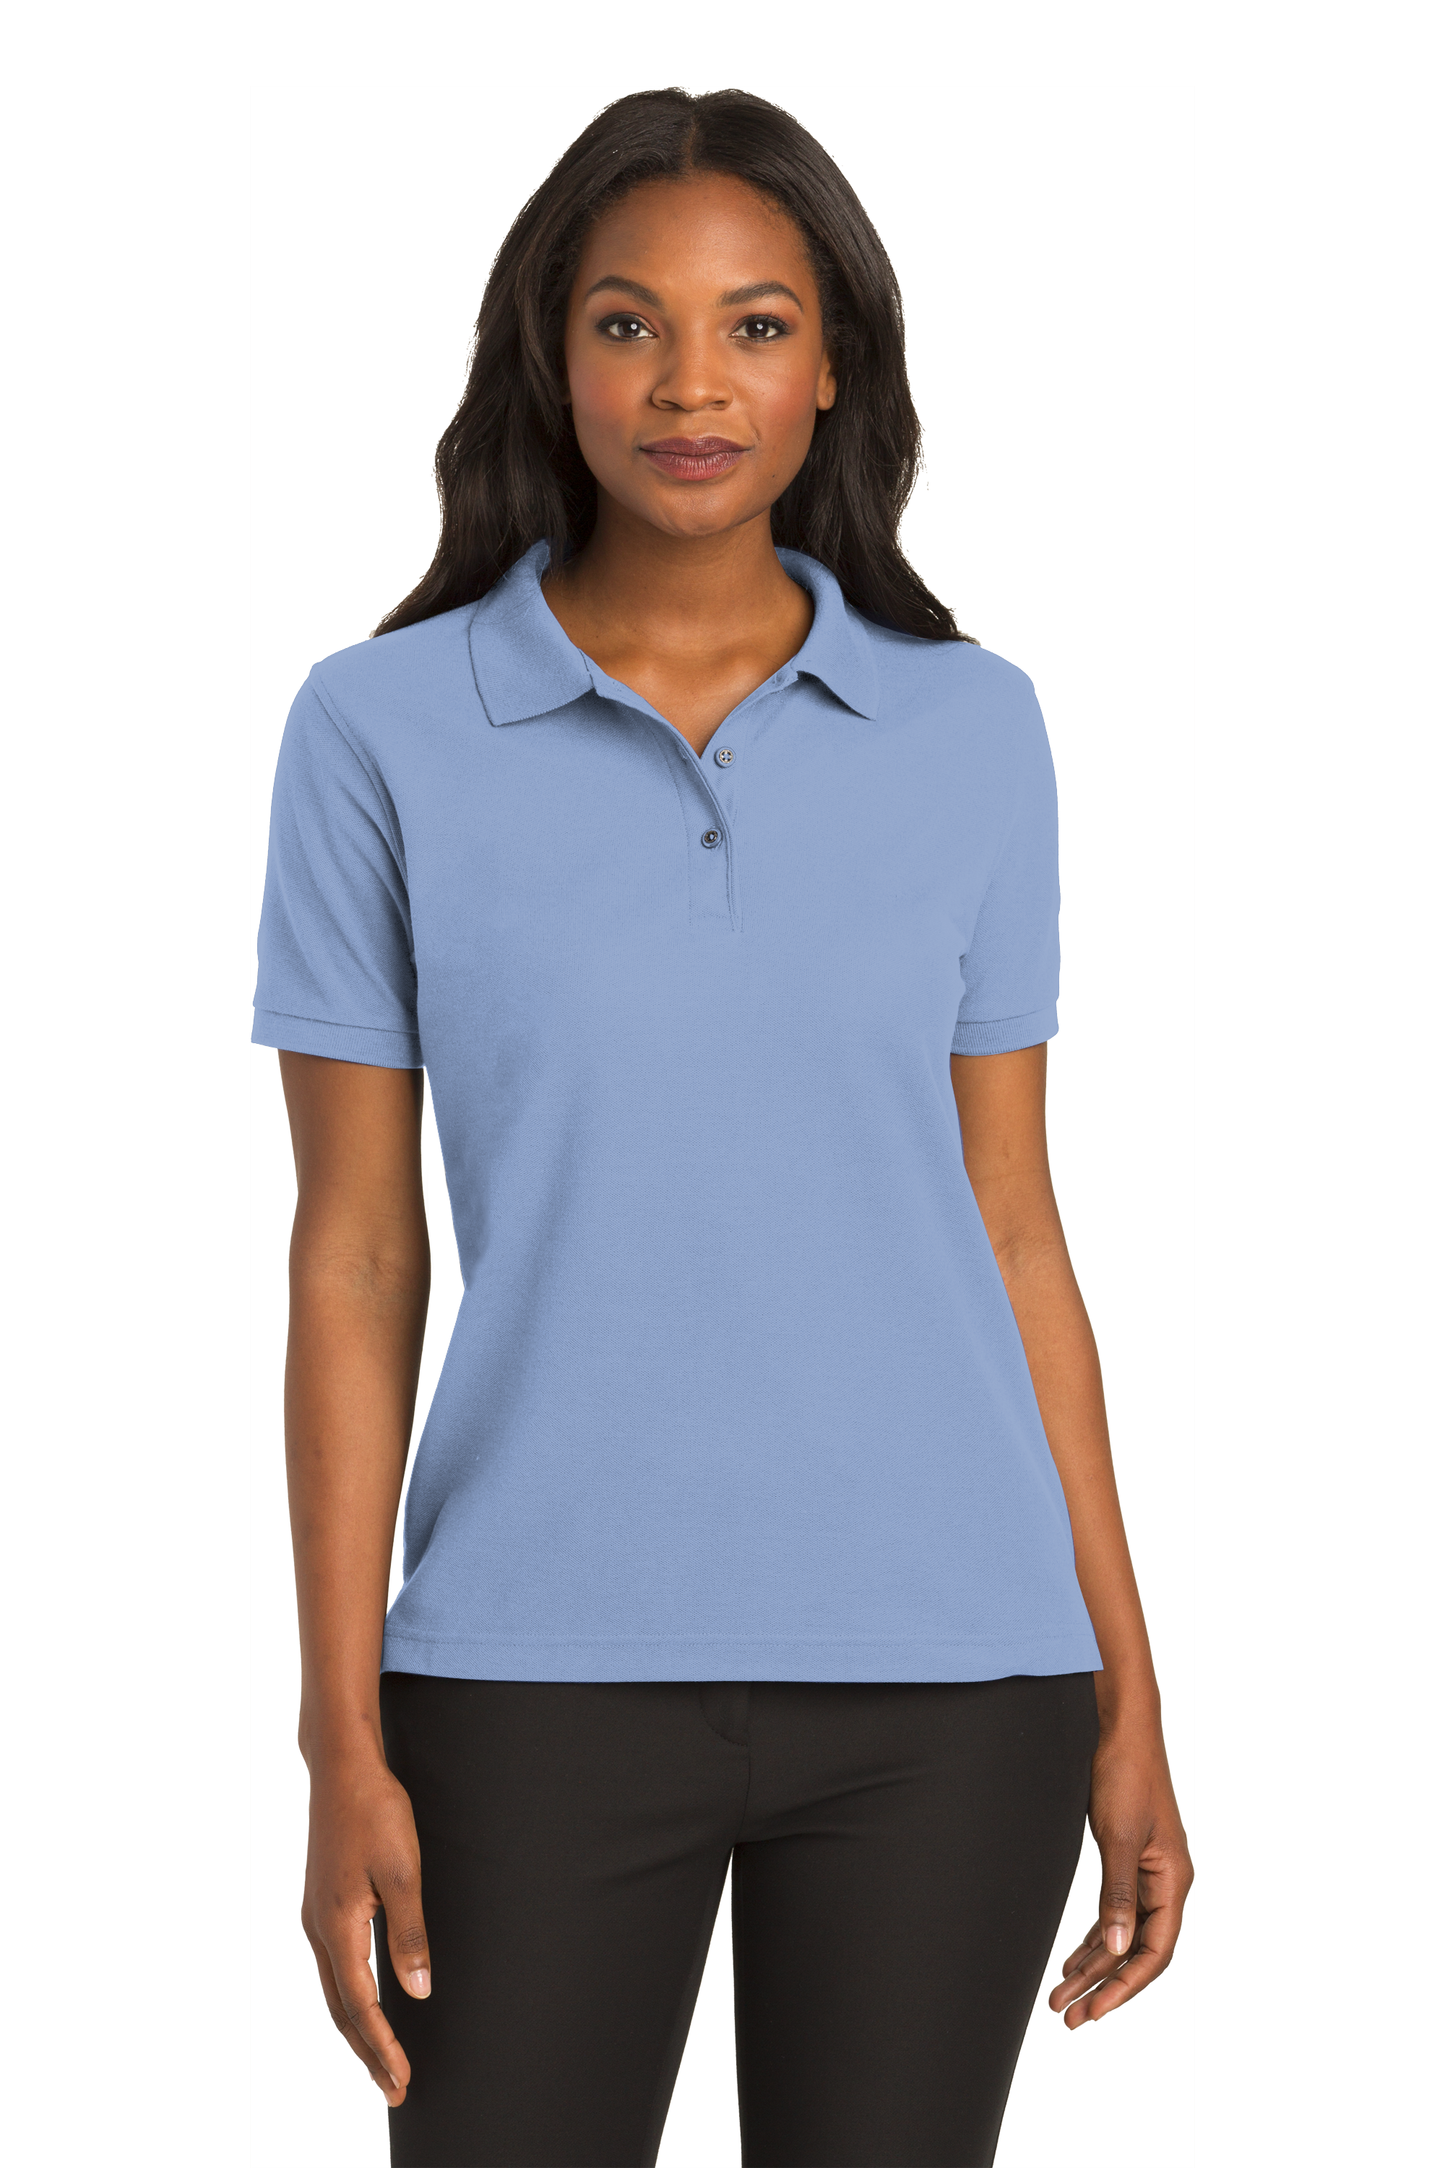 Ladies Port Authority Silk Touch Cotton Polo Student, Staff and Parents